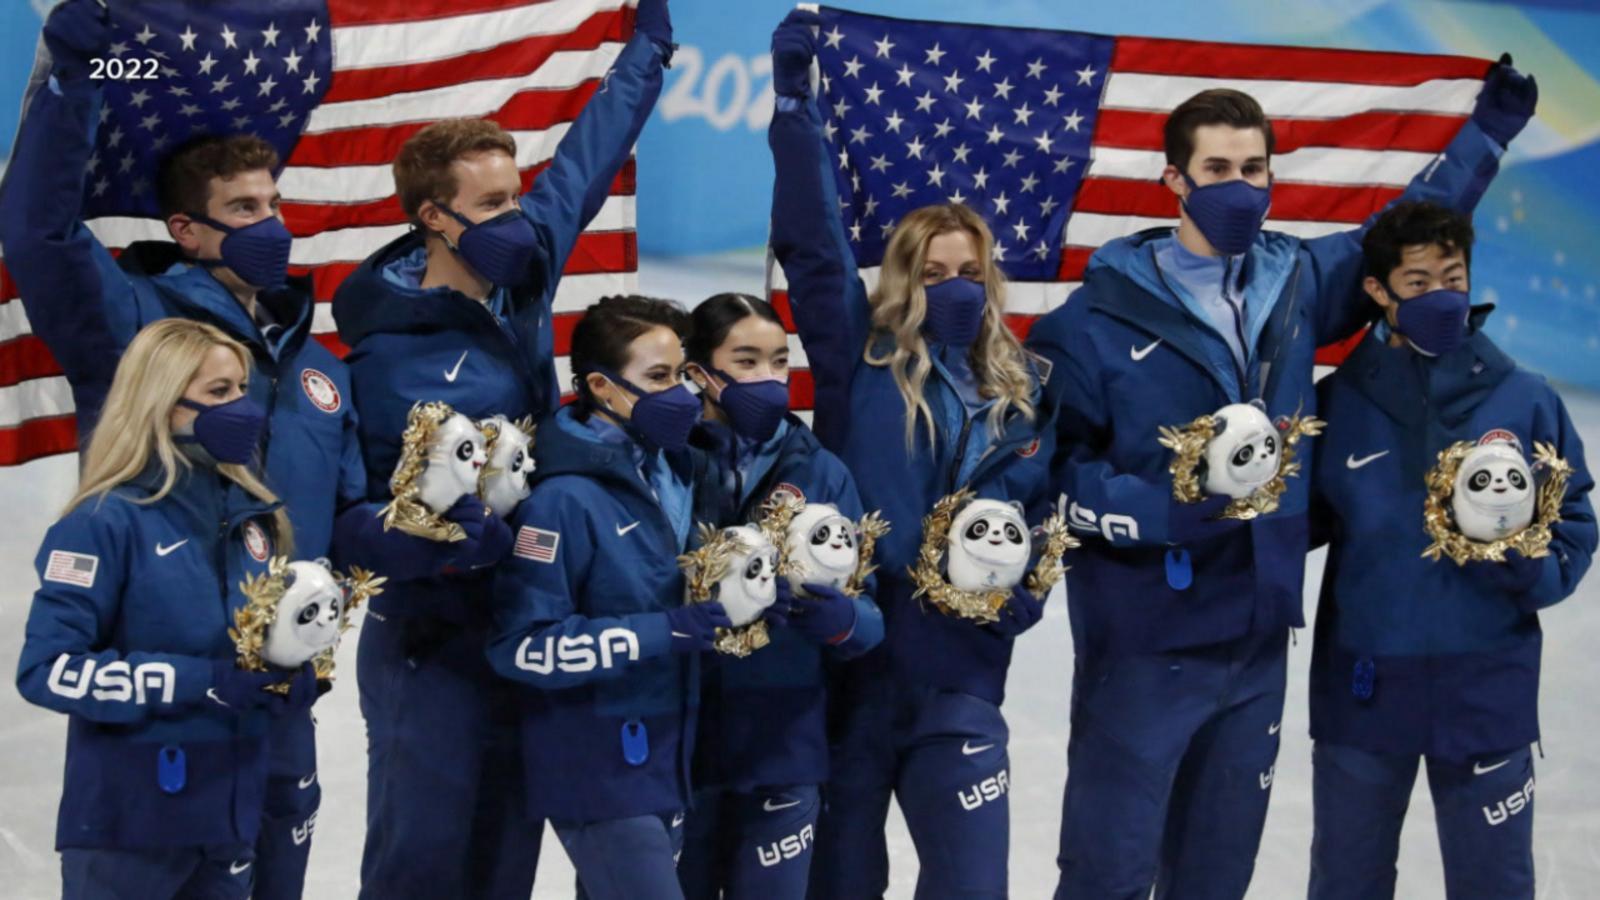 VIDEO: 2022 US Olympic figure skating team awarded gold medal